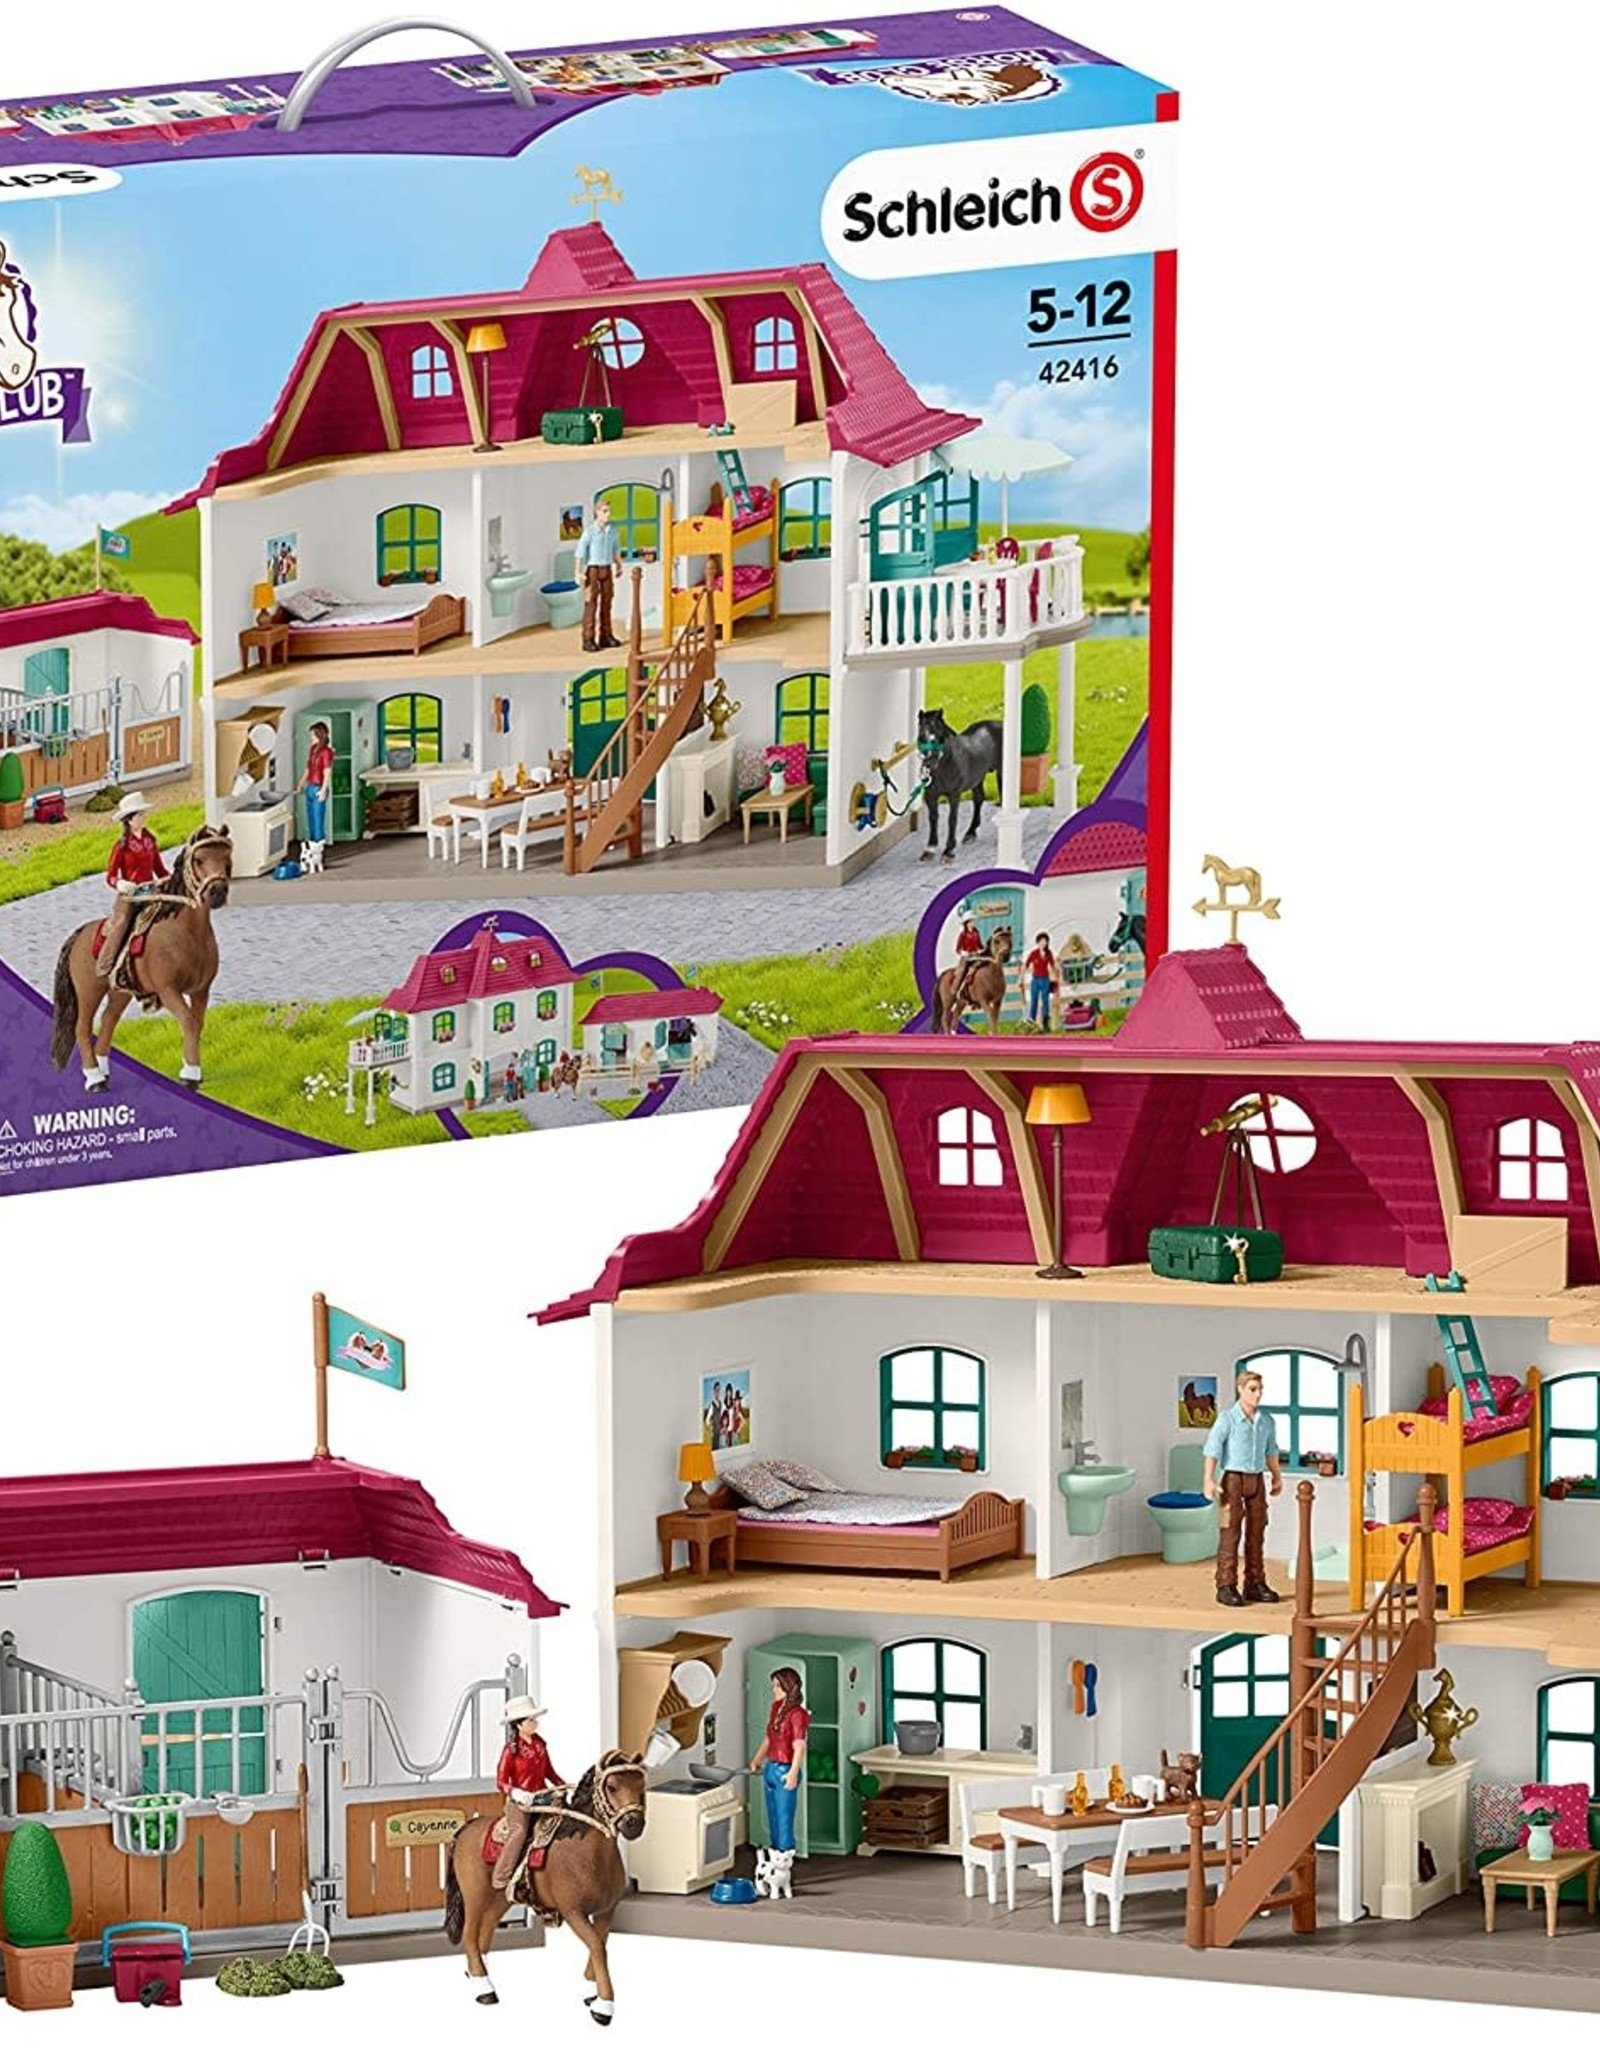 70-Piece Lakeside Country Dollhouse and Horse Stable Playset Schleich Horse Club 